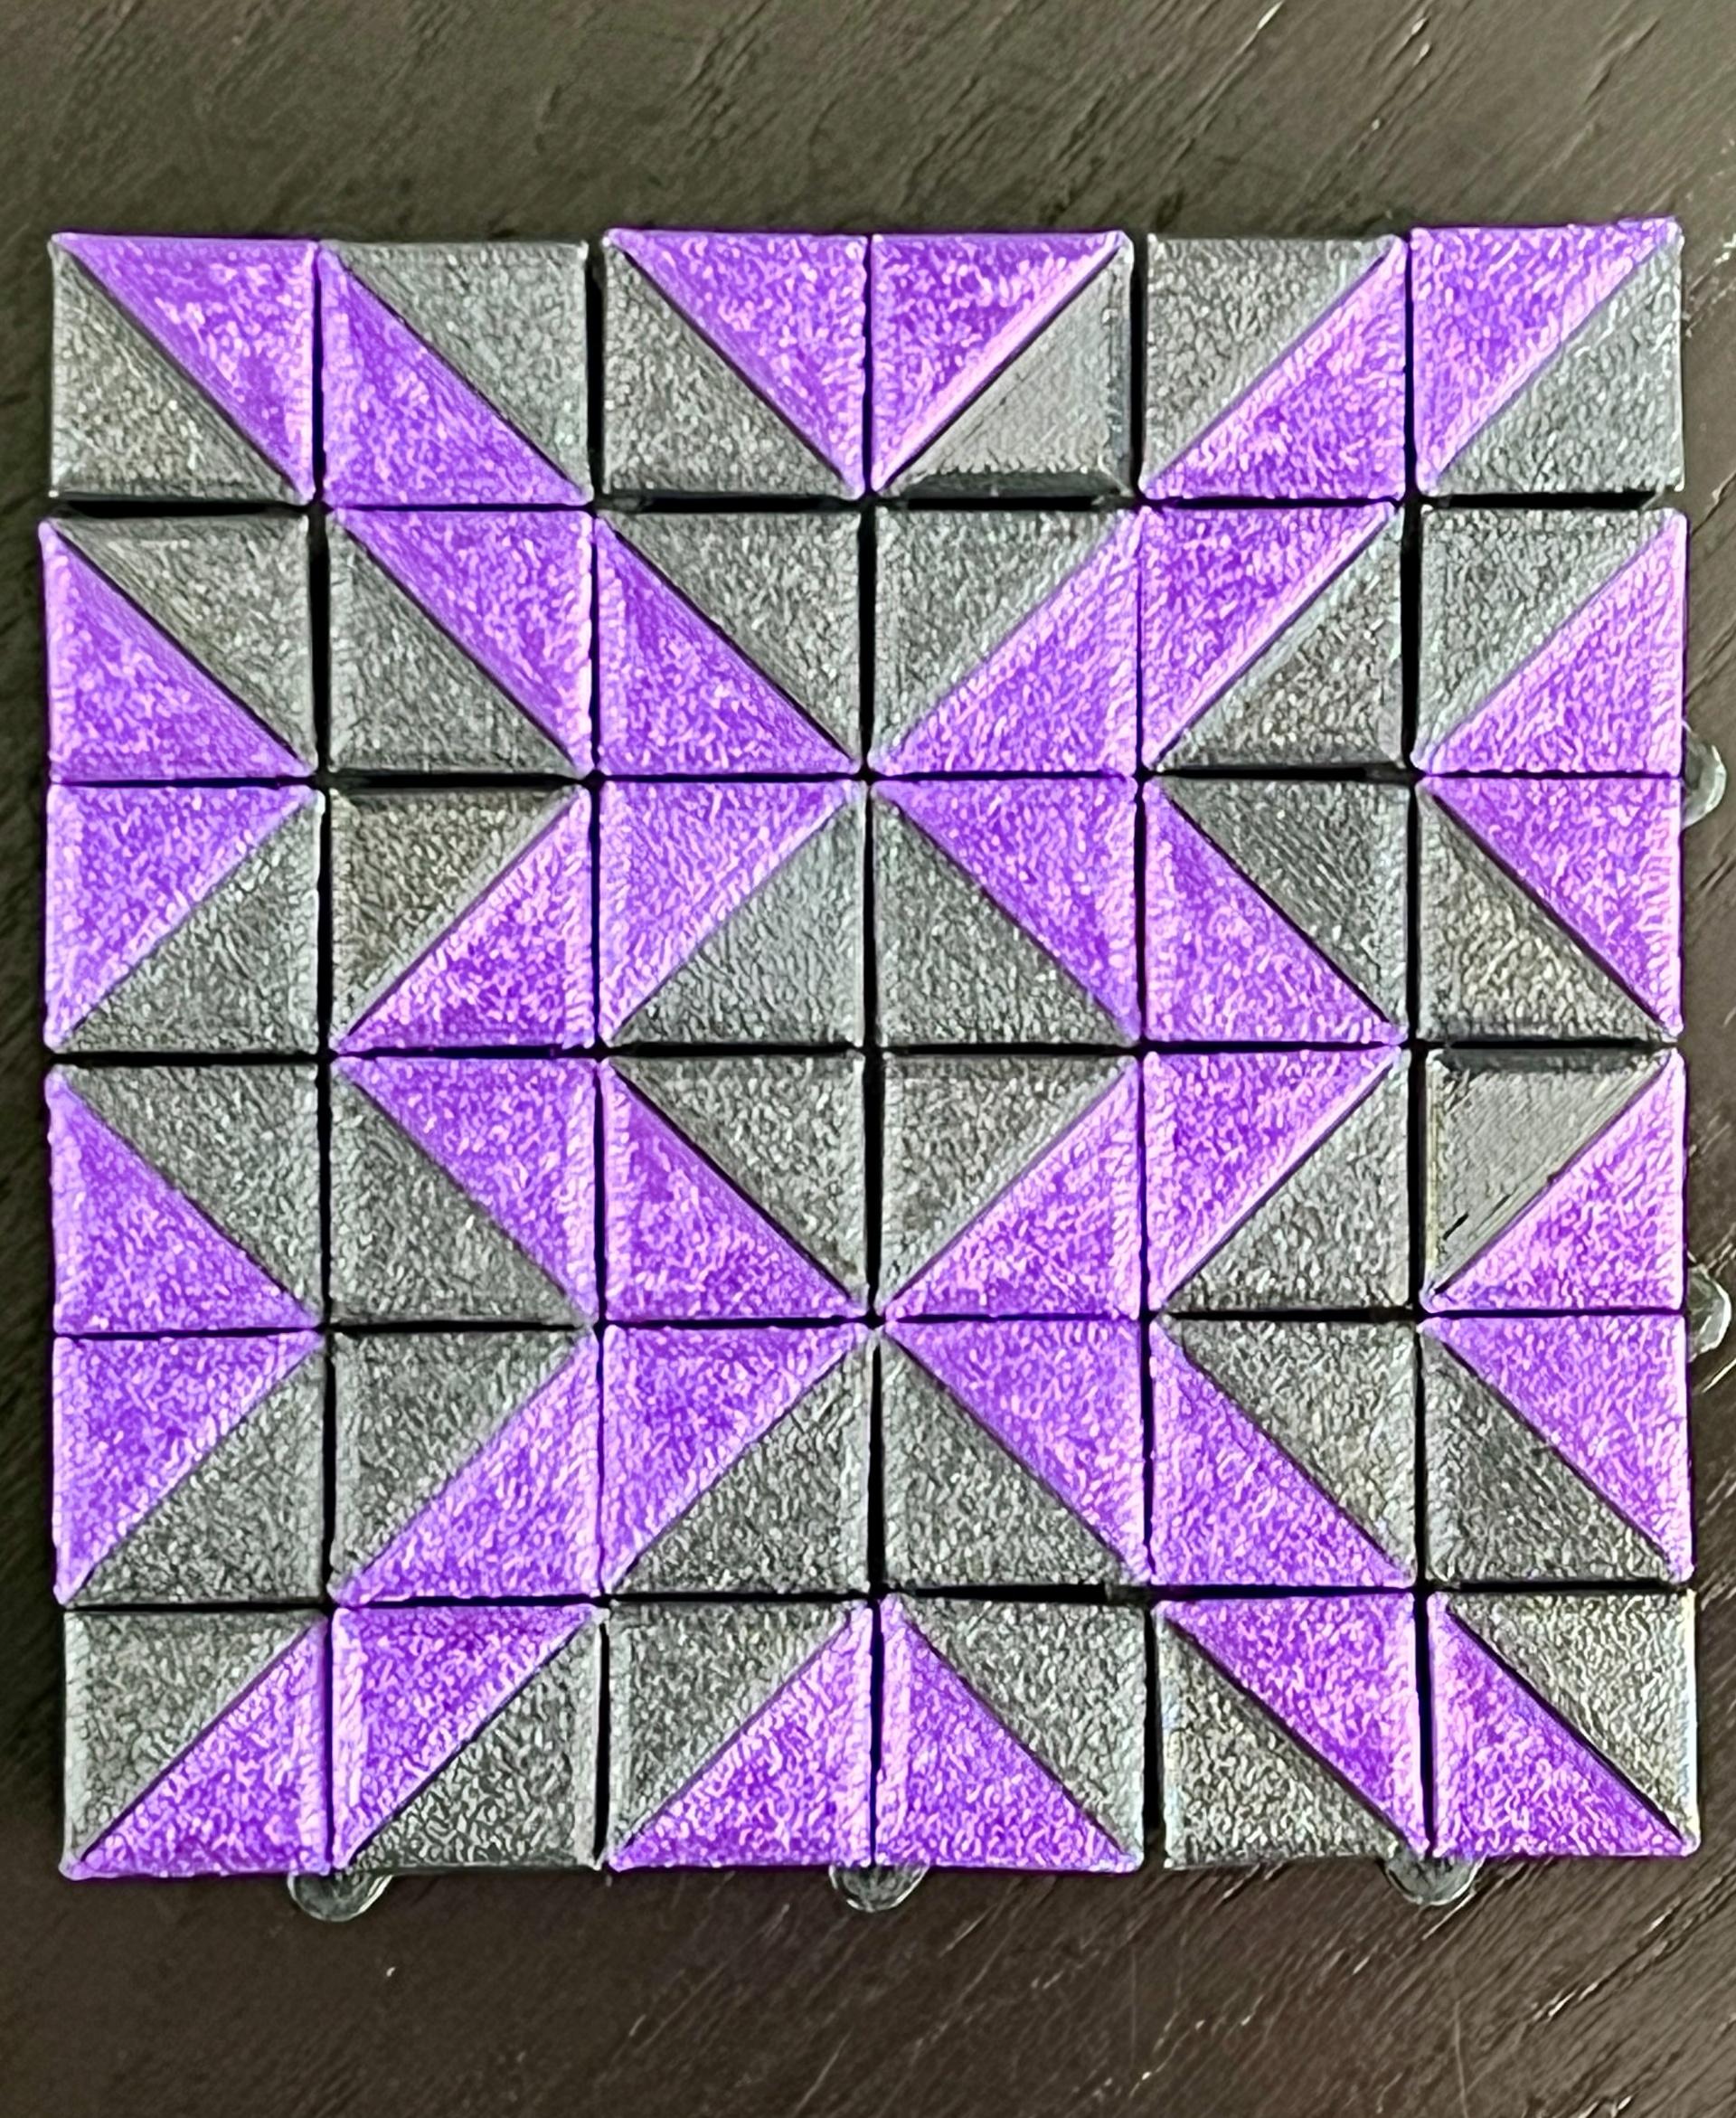 Auxetic Tile // 18mm Diagonal Split - This is my first contest! I really like purple because it is my favorite color and my dad helped me with the printing. It was a lot of fun to try rearranging the pieces until I was happy with my design. Thank you! - 3d model